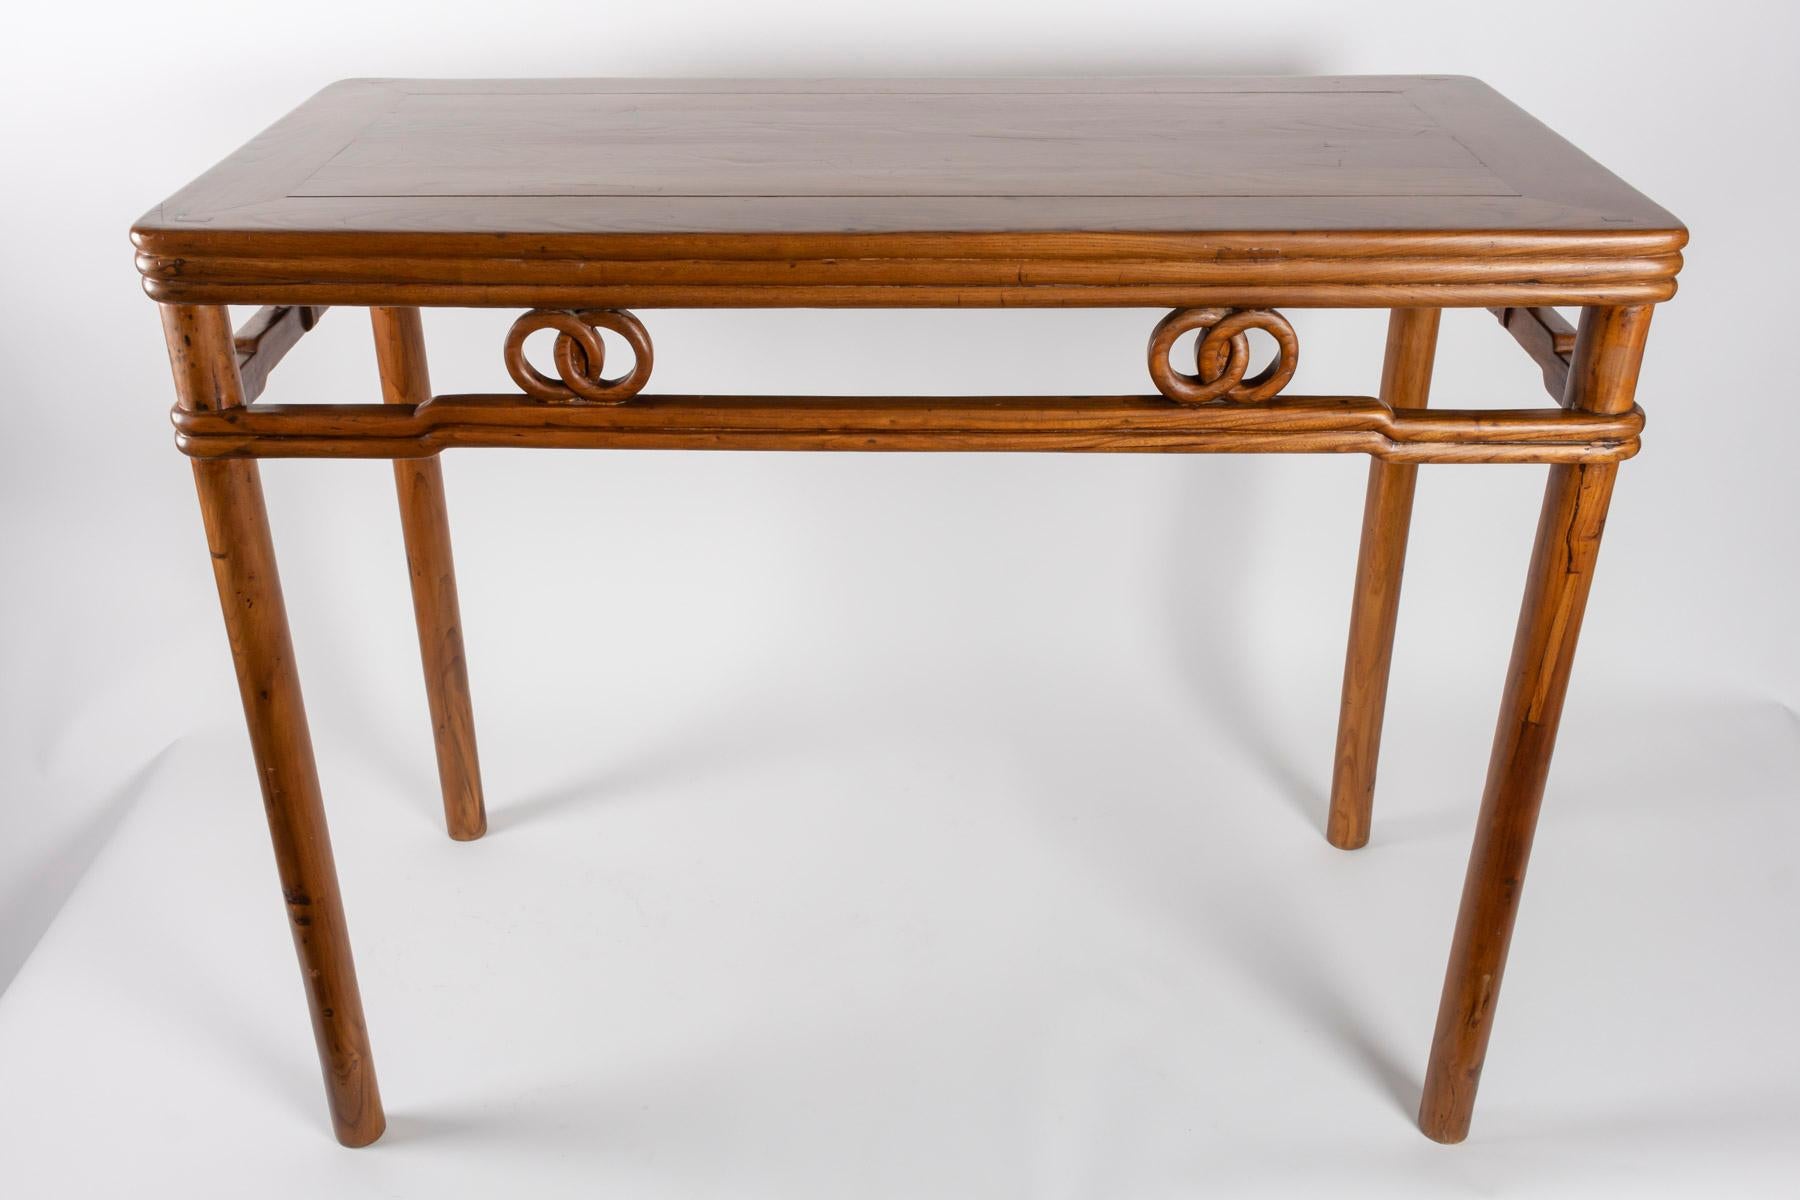 Light fruitwood table with rings decor on belt, China, 1900
Measures: H: 84cm, W: 52cm, W: 106cm.